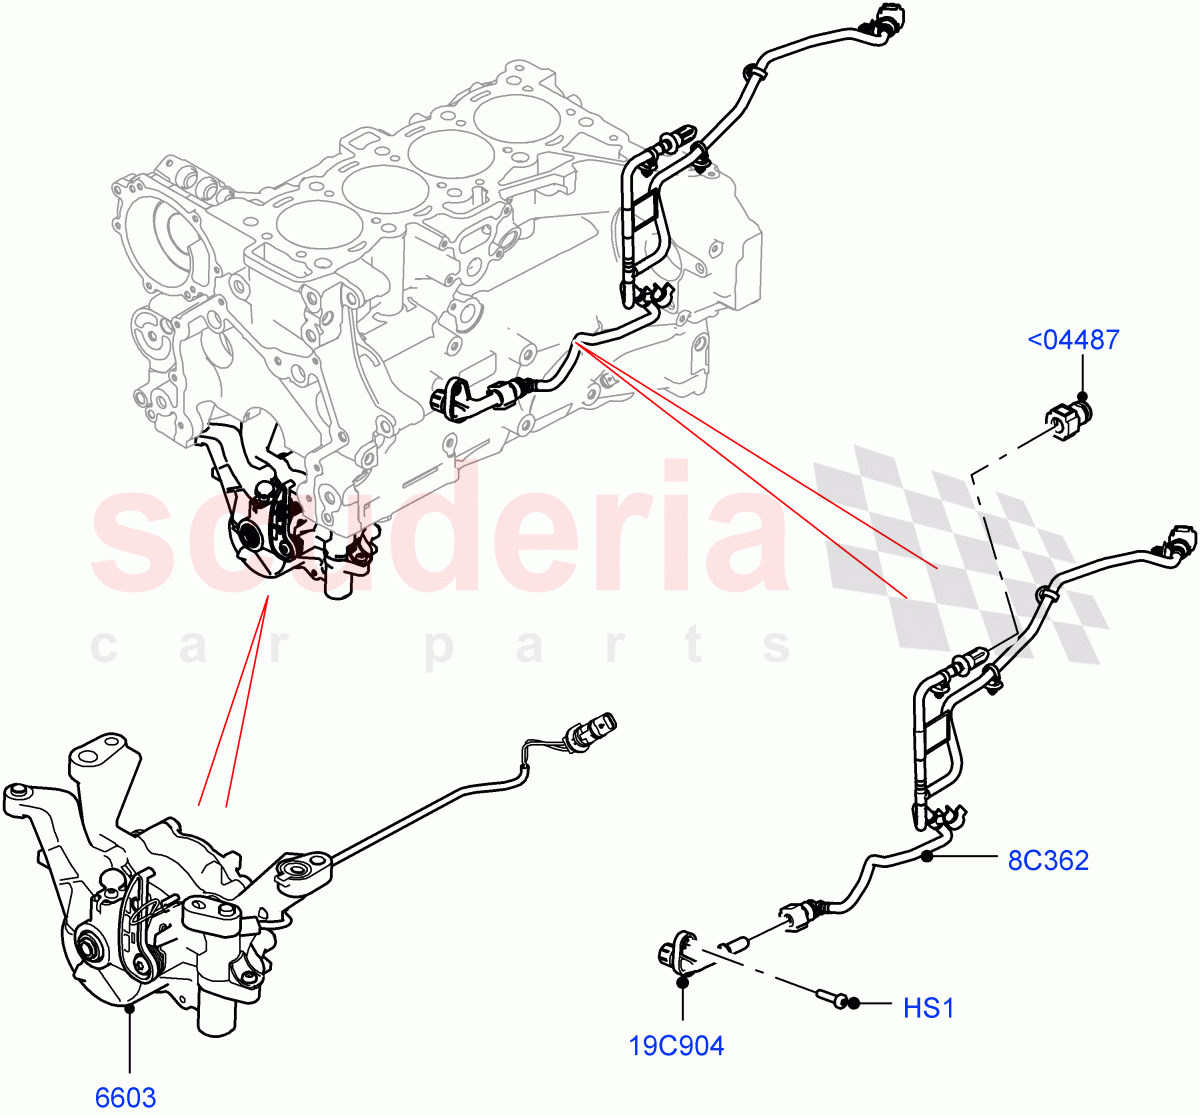 Vacuum Control And Air Injection(Nitra Plant Build)(2.0L AJ200P Hi PHEV)((V)FROML2000001) of Land Rover Land Rover Defender (2020+) [2.0 Turbo Petrol AJ200P]